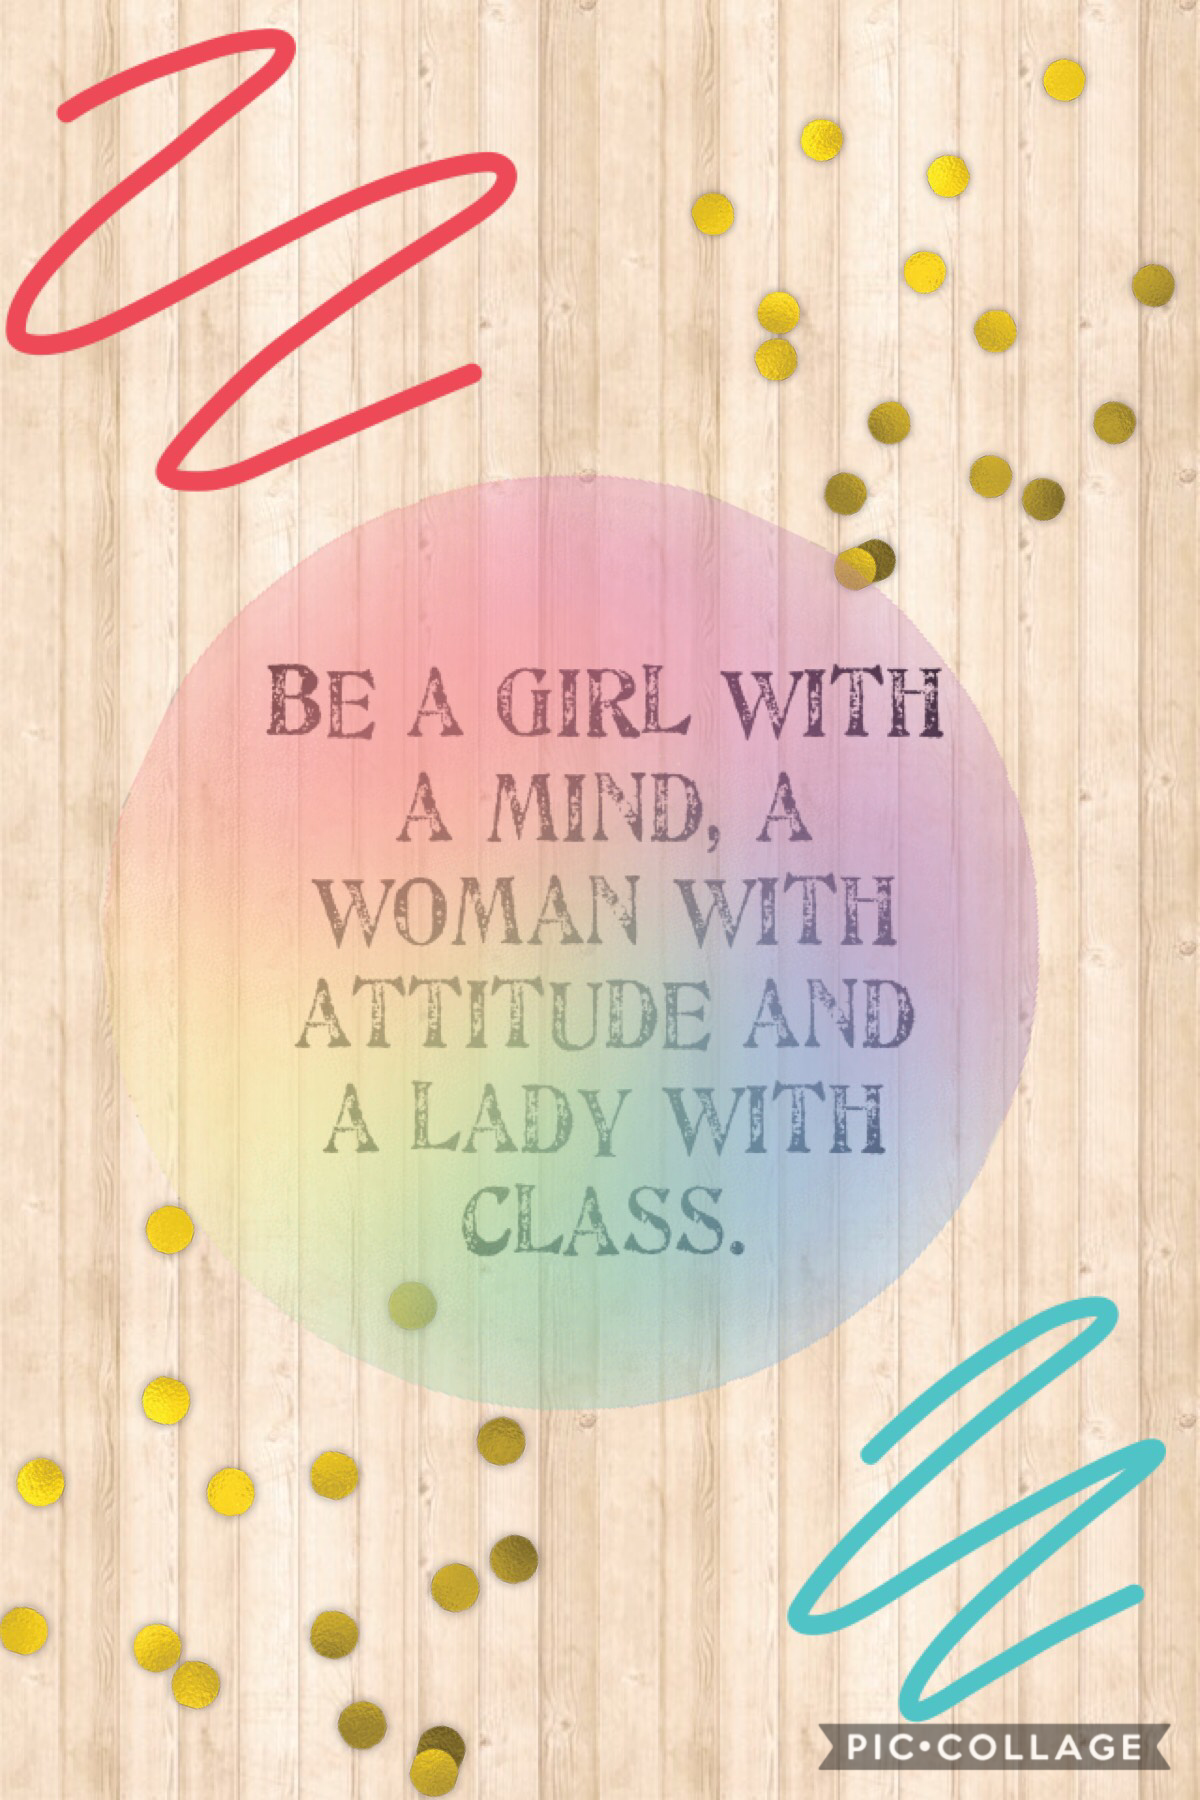 This is the quote for all girls!.